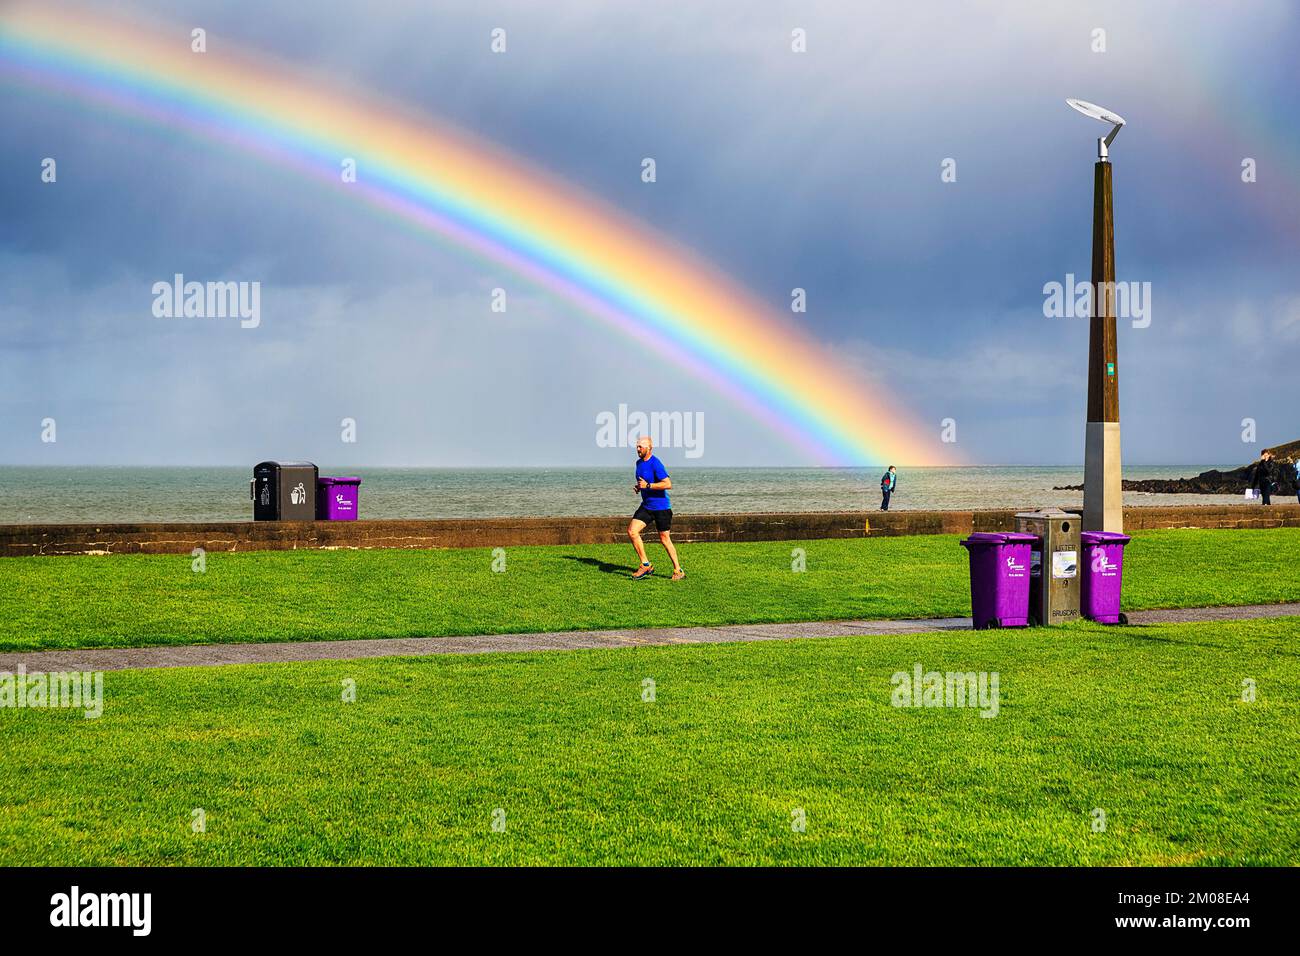 Pedestrians and joggers on seafront promenade, dramatic cloudy sky with rainbow, Bray, Wicklow, Ireland, Europe Stock Photo